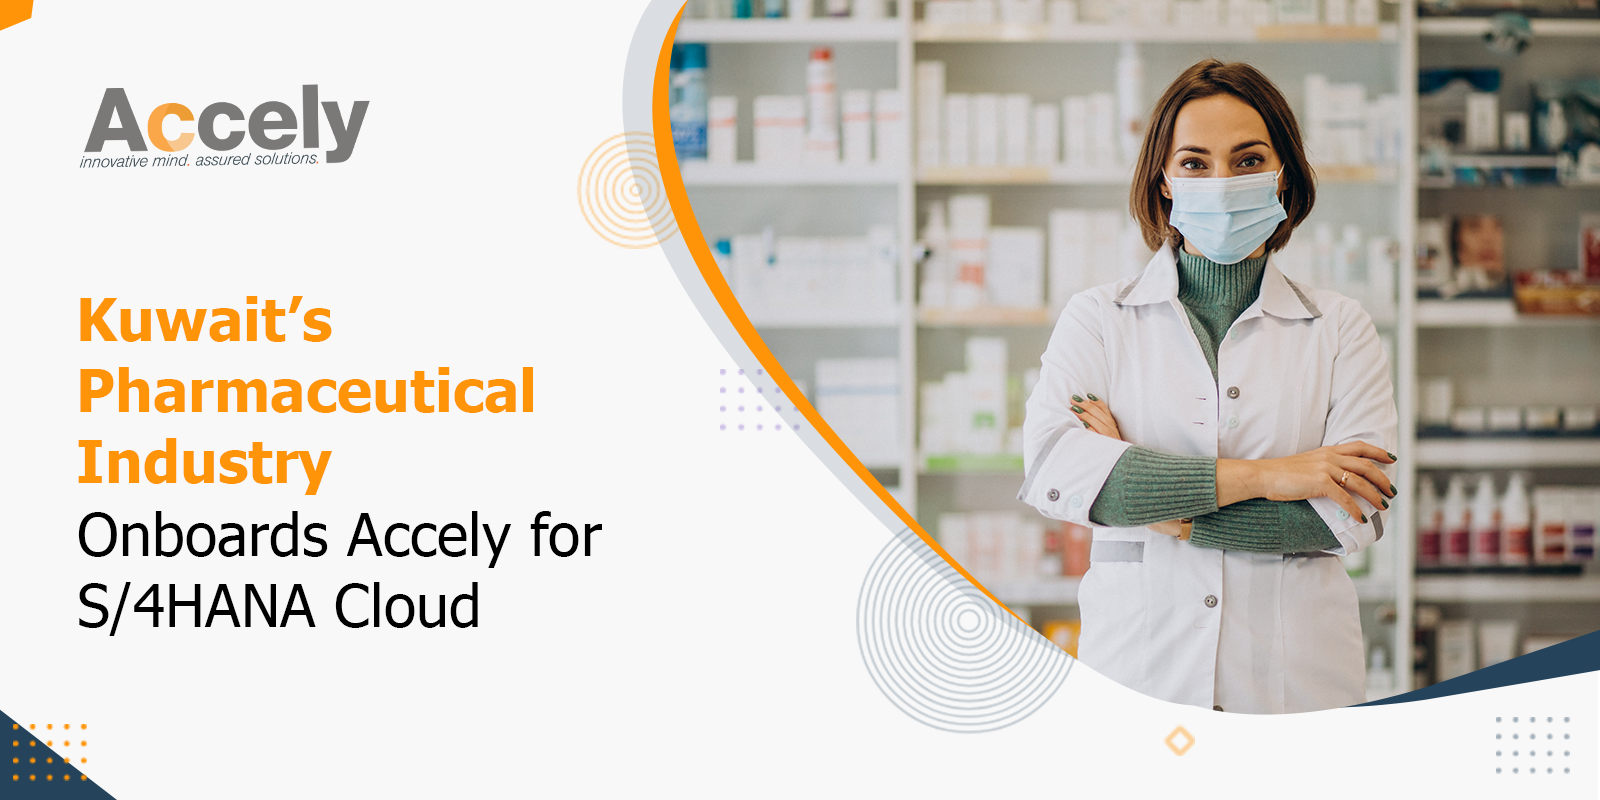 Kuwait’s Pharmaceutical Industry Onboards Accely for S/4HANA Cloud